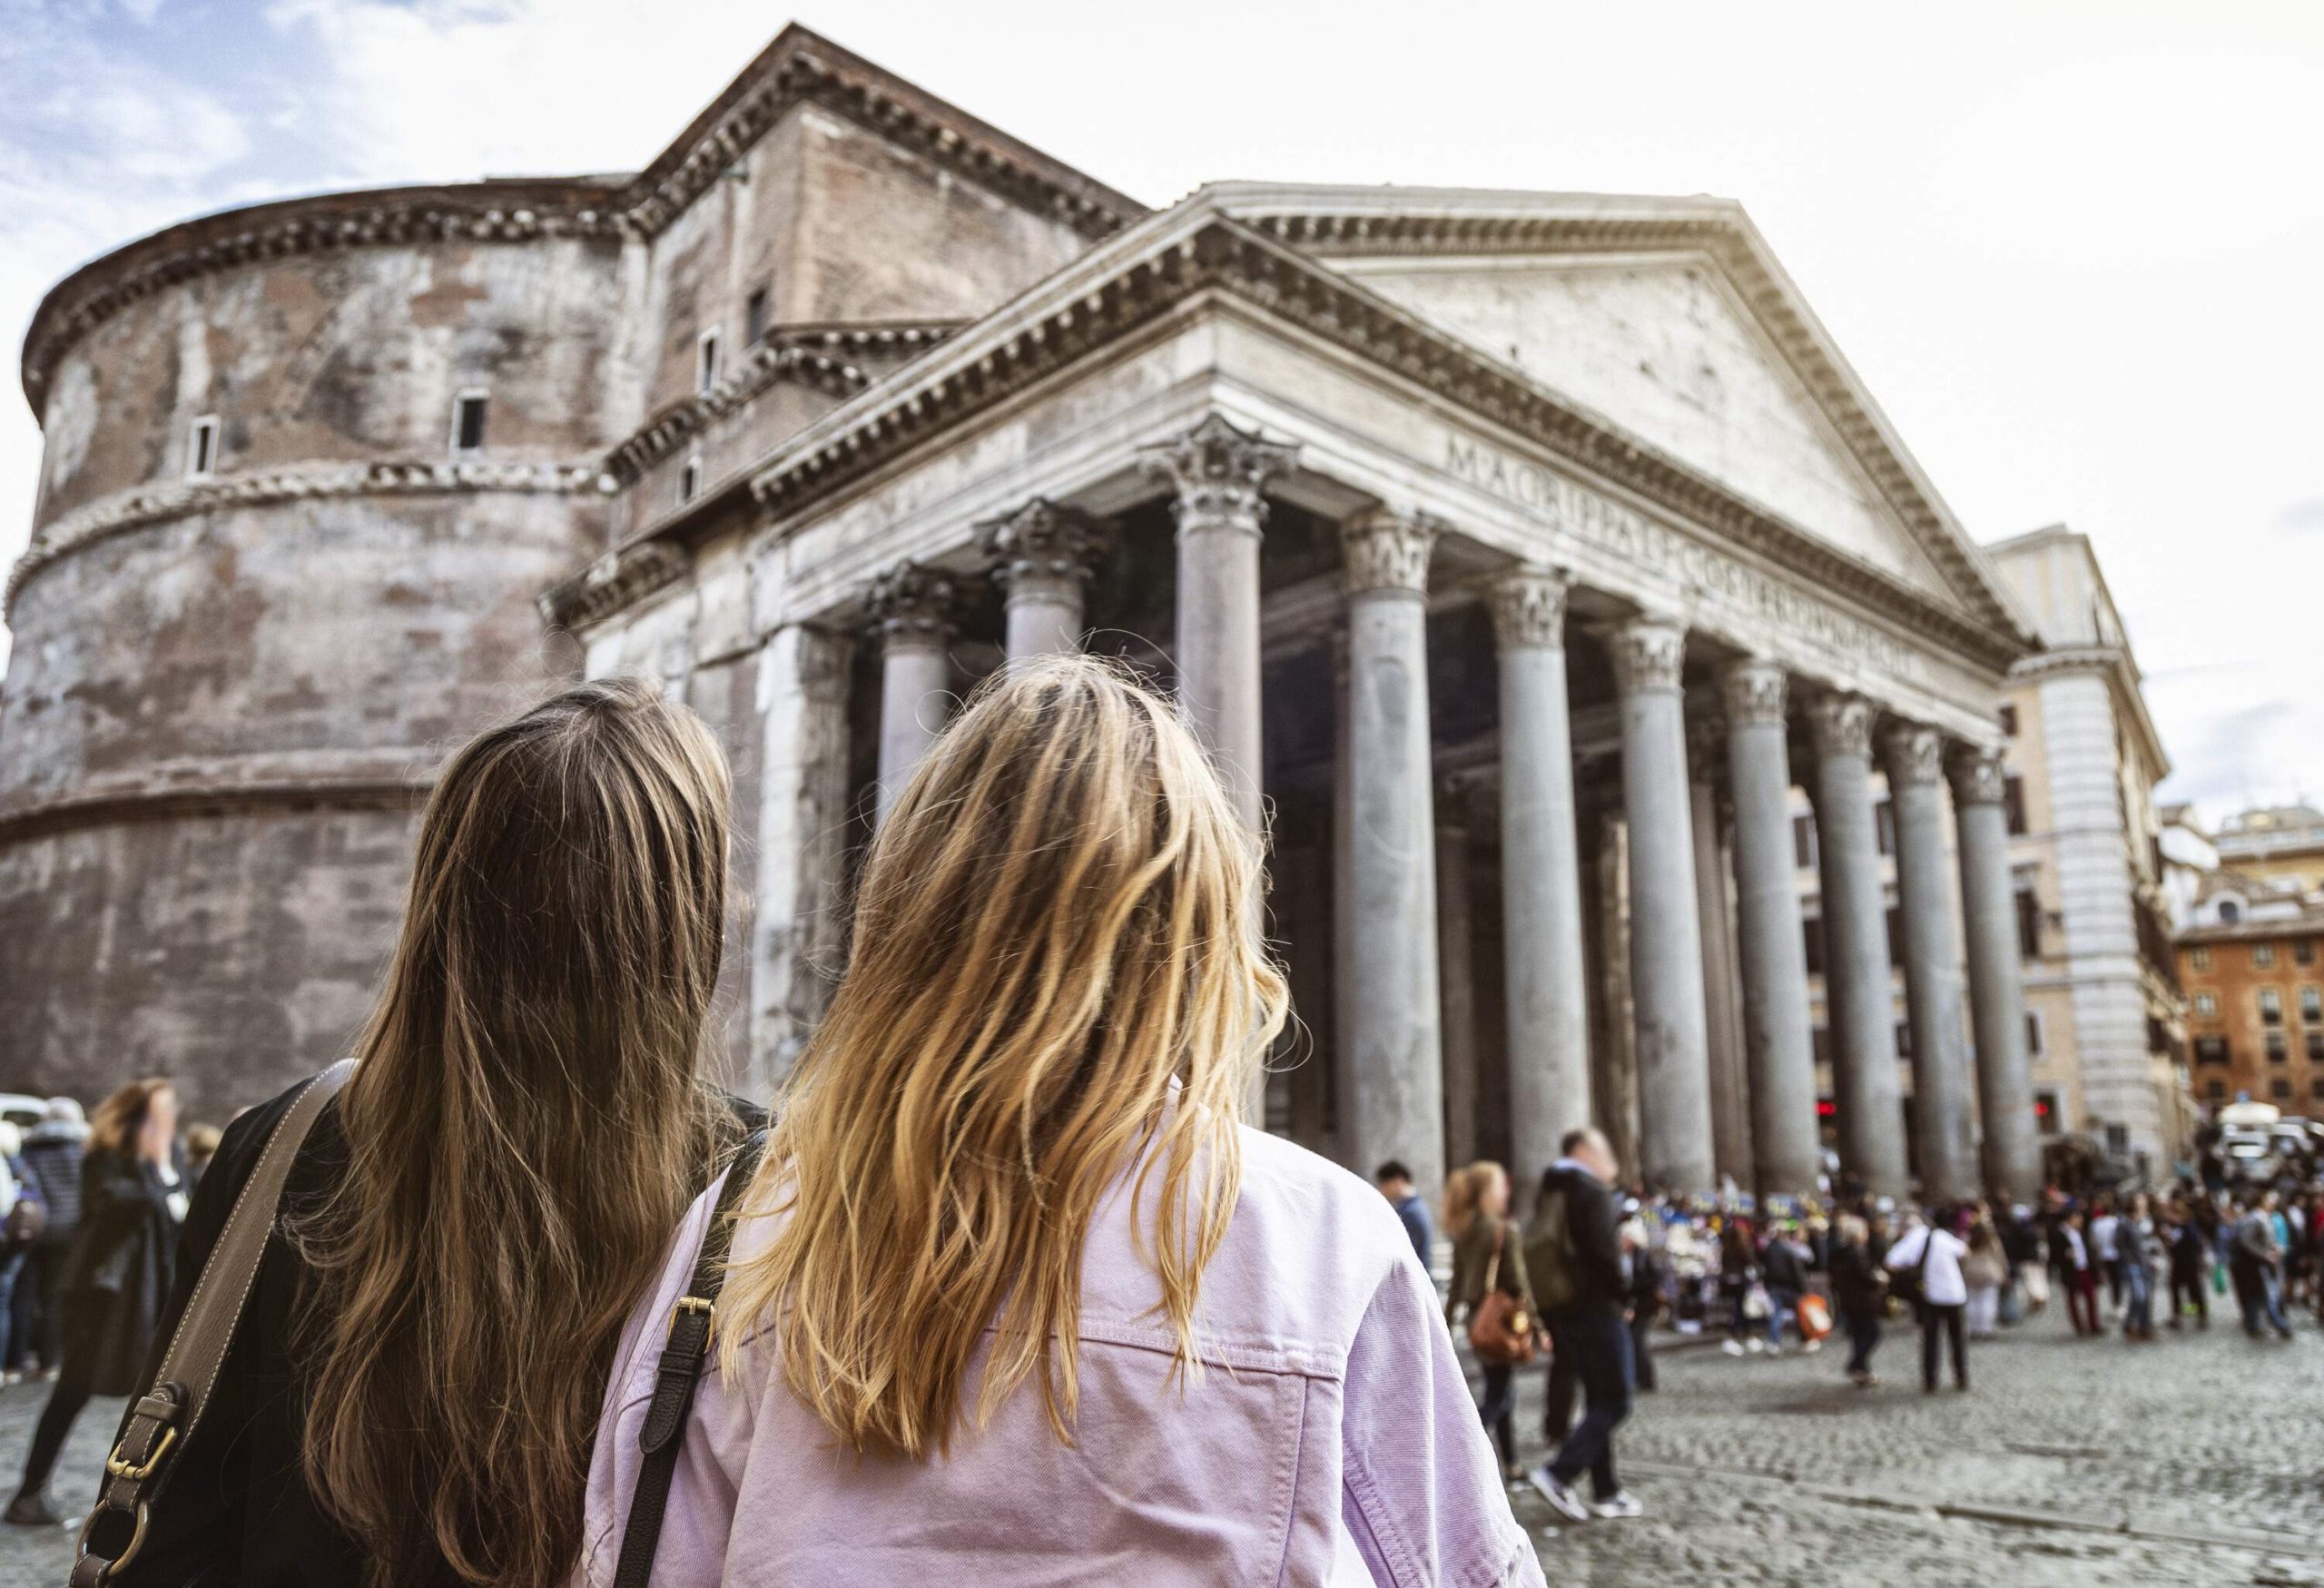 Two women gazing towards the Pantheon and the people passing by across the piazza.